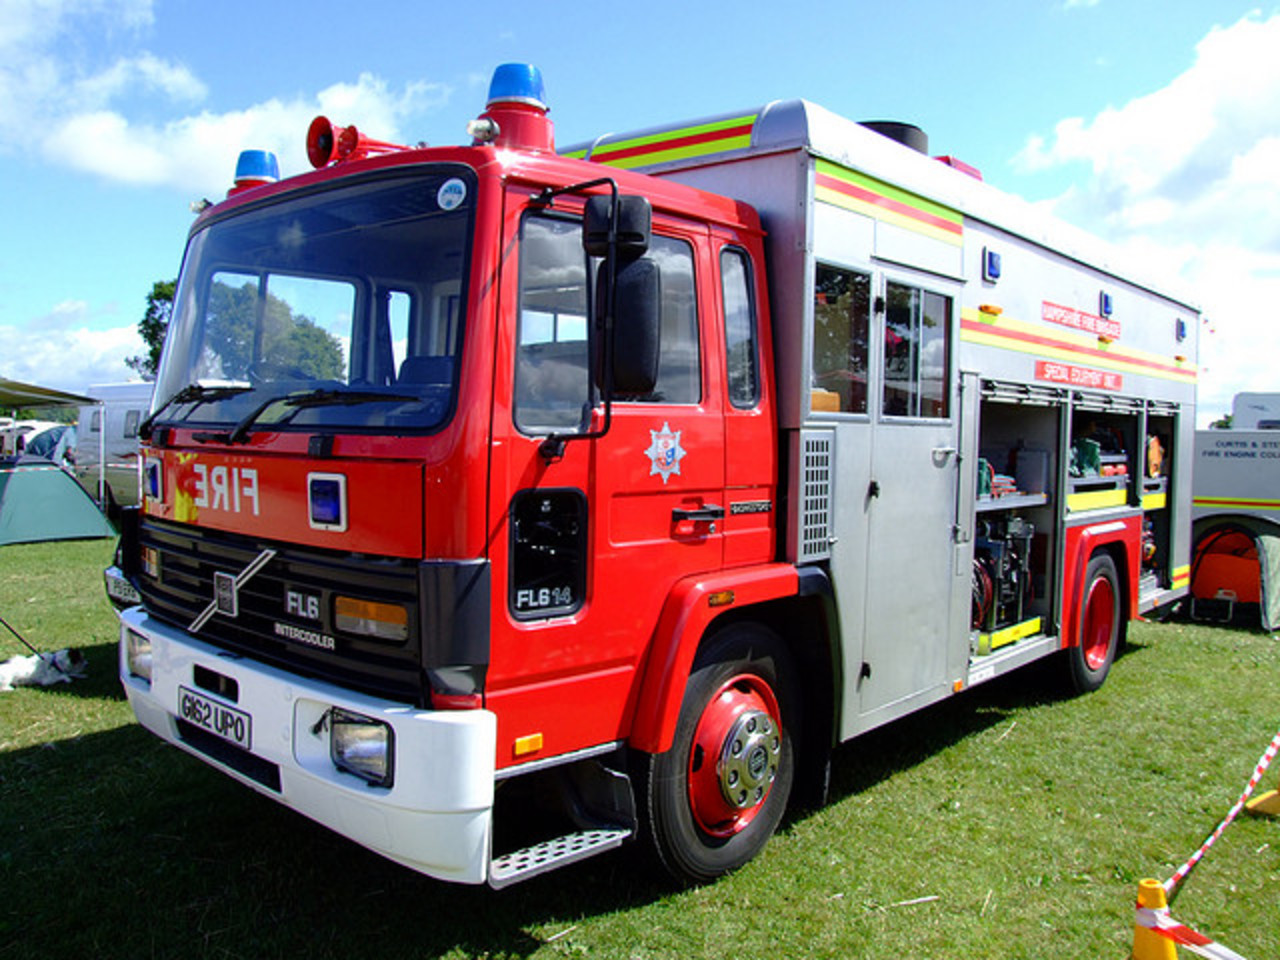 Volvo FL6 14 intercooler fire and rescue vehicle | Flickr - Photo ...